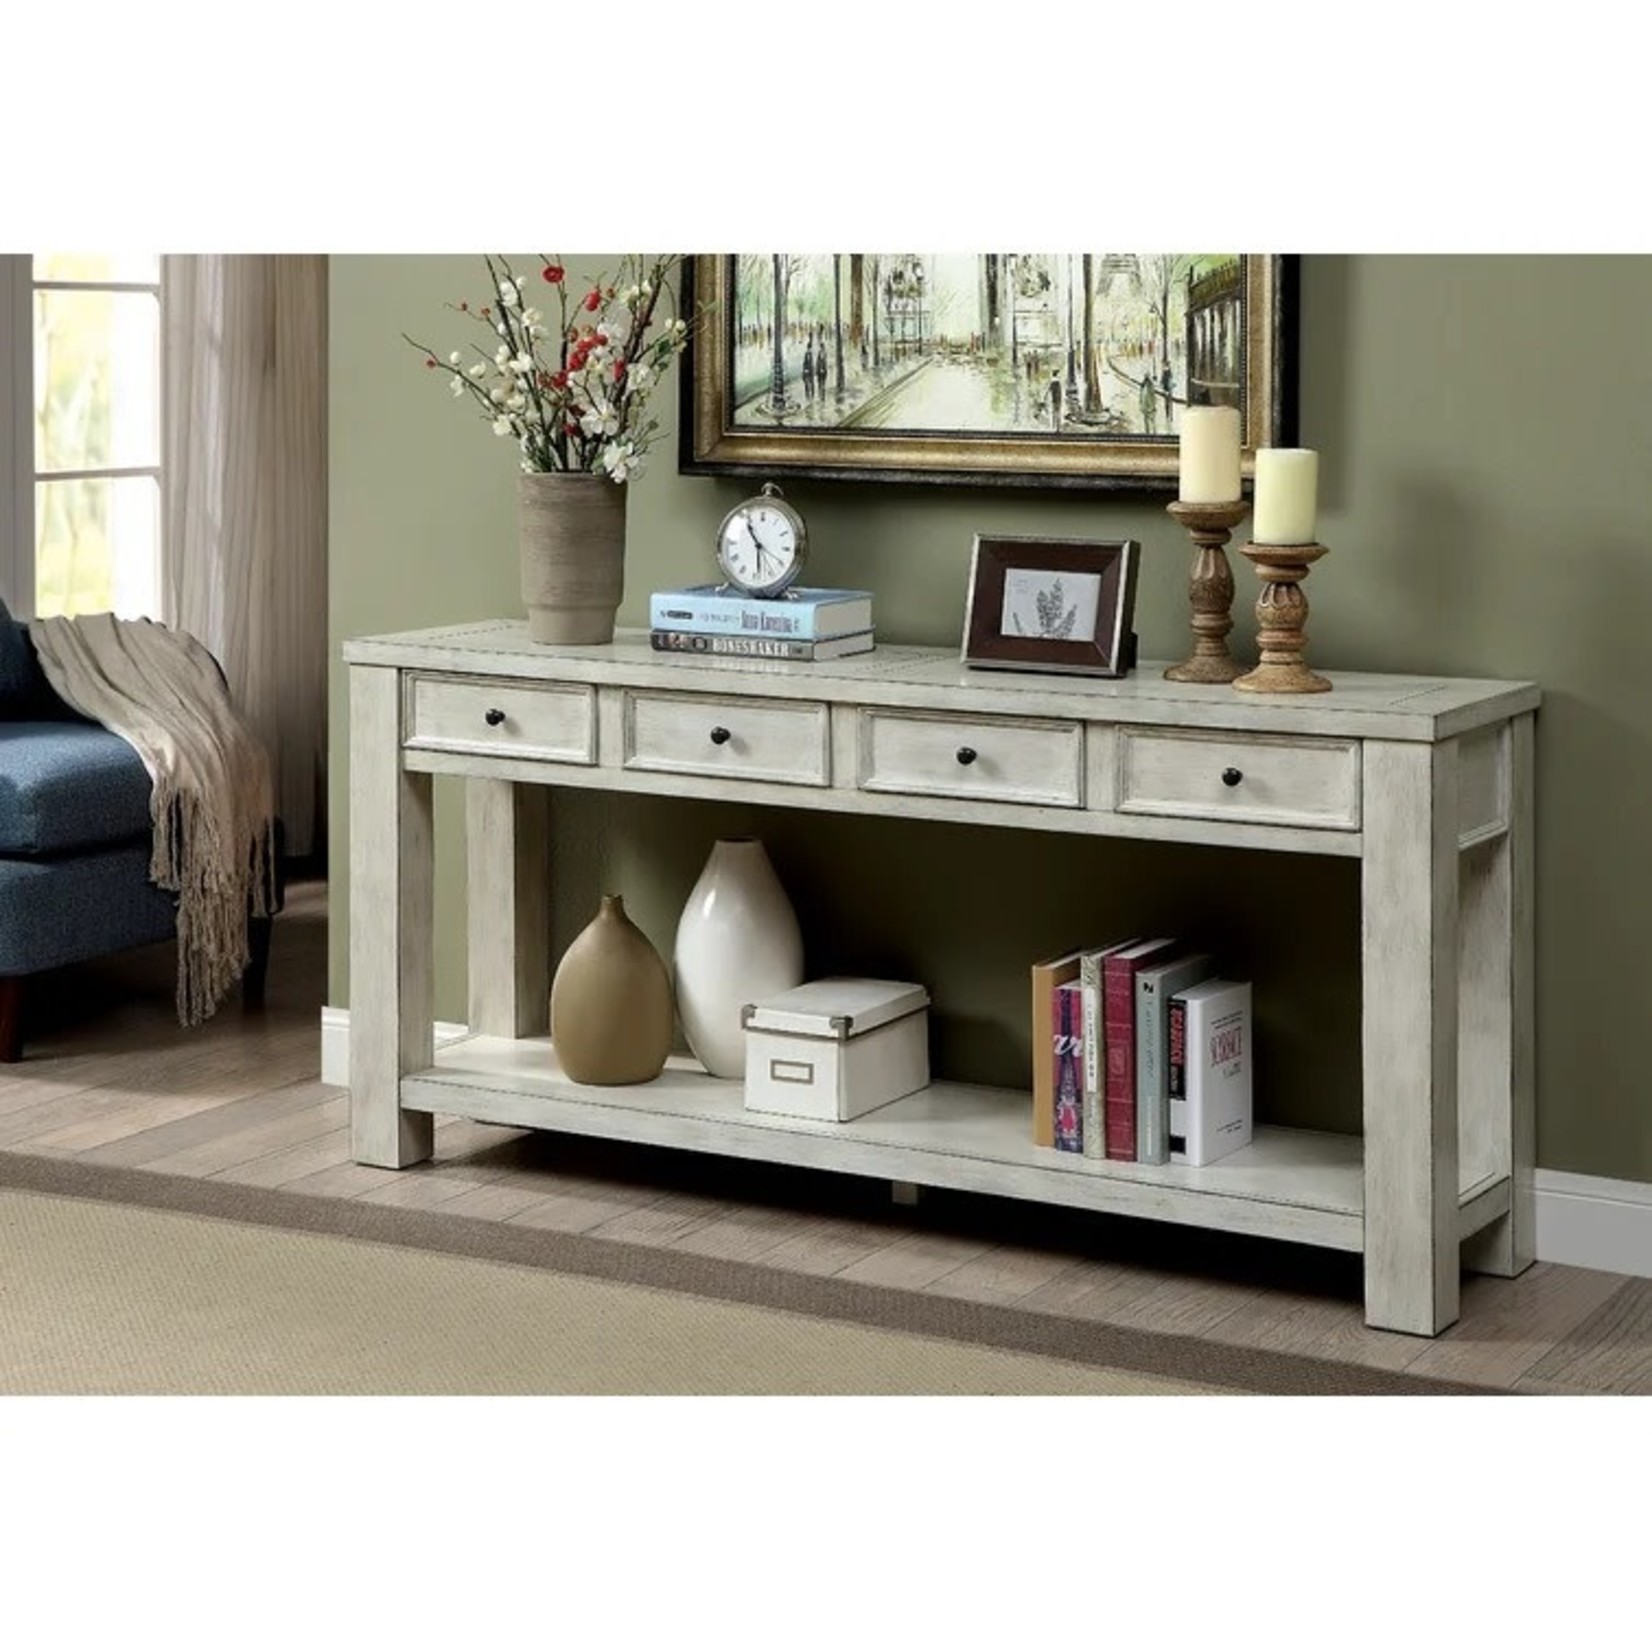 *Rentz 64" Console Table - Off White